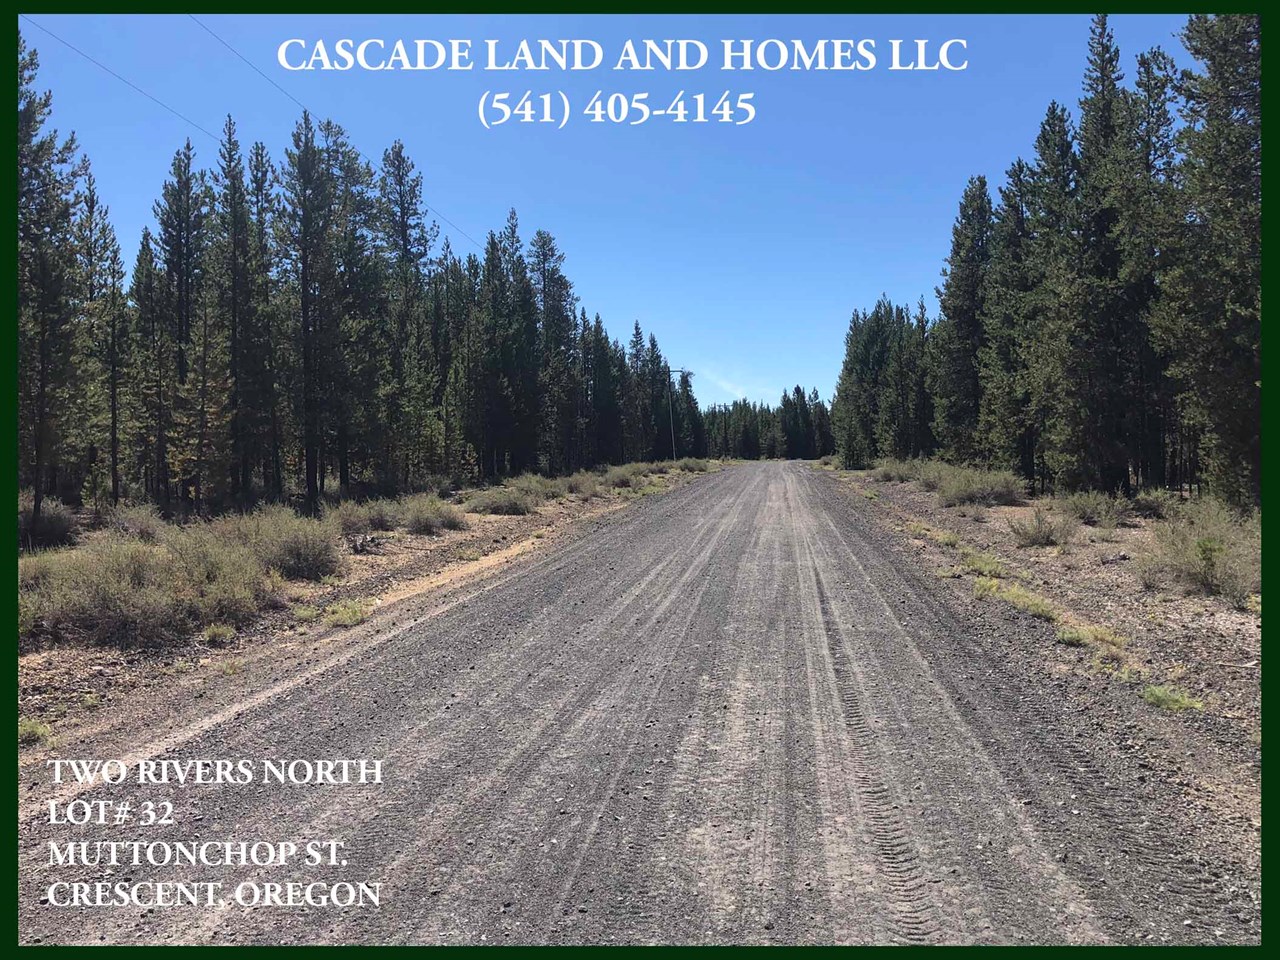 the roads within the subdivision are compacted gravel and very easy to travel even with a large rv or horse / toy hauler!